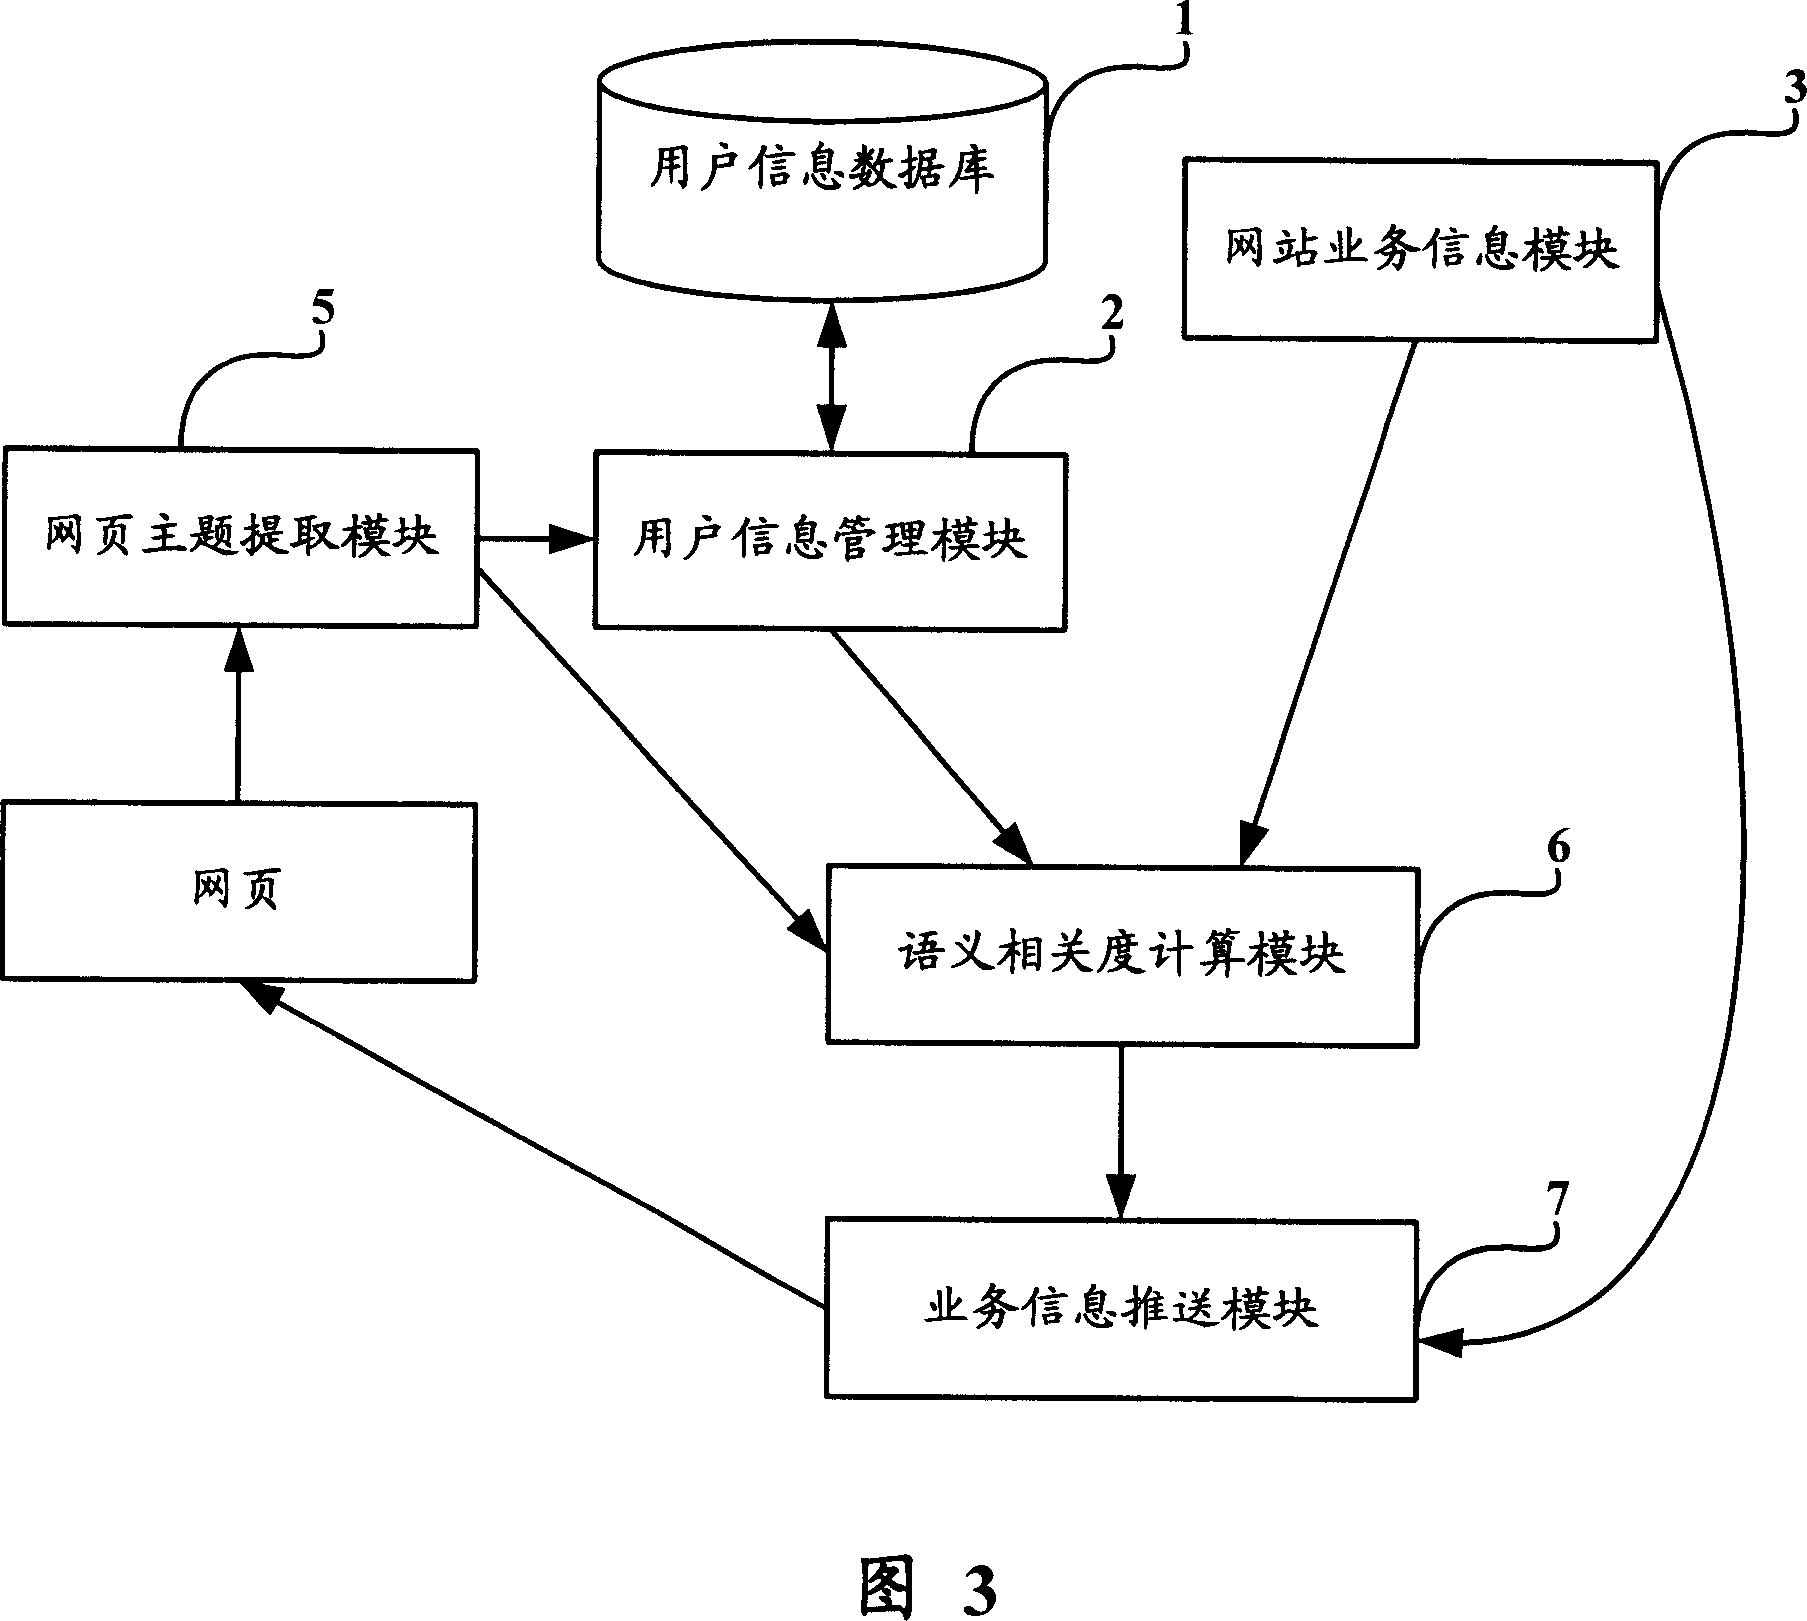 Personalized information push system and method